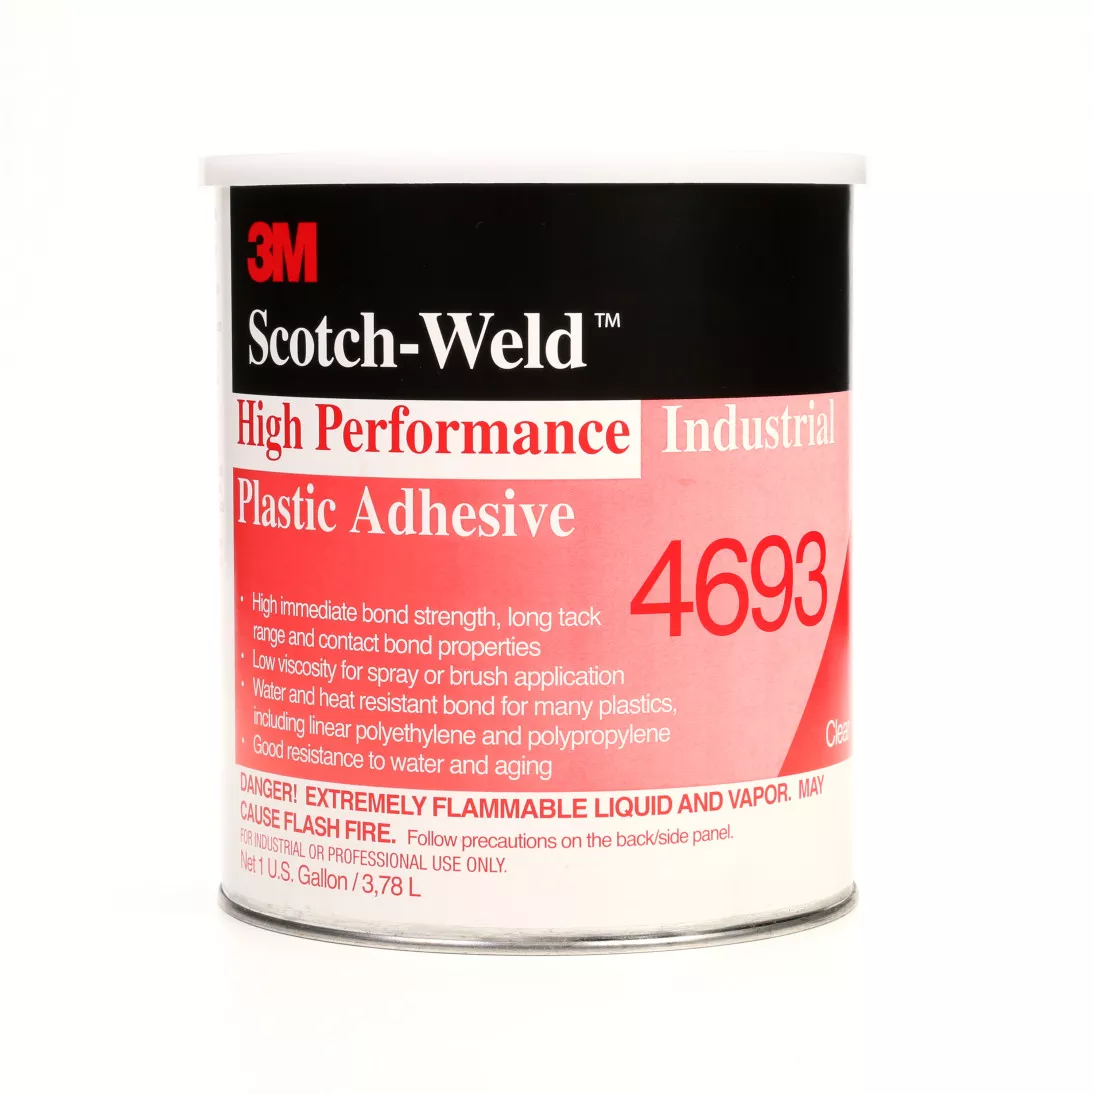 3M™ High Performance Industrial Plastic Adhesive 4693, Light Amber, 1
Gallon Can, 4/case